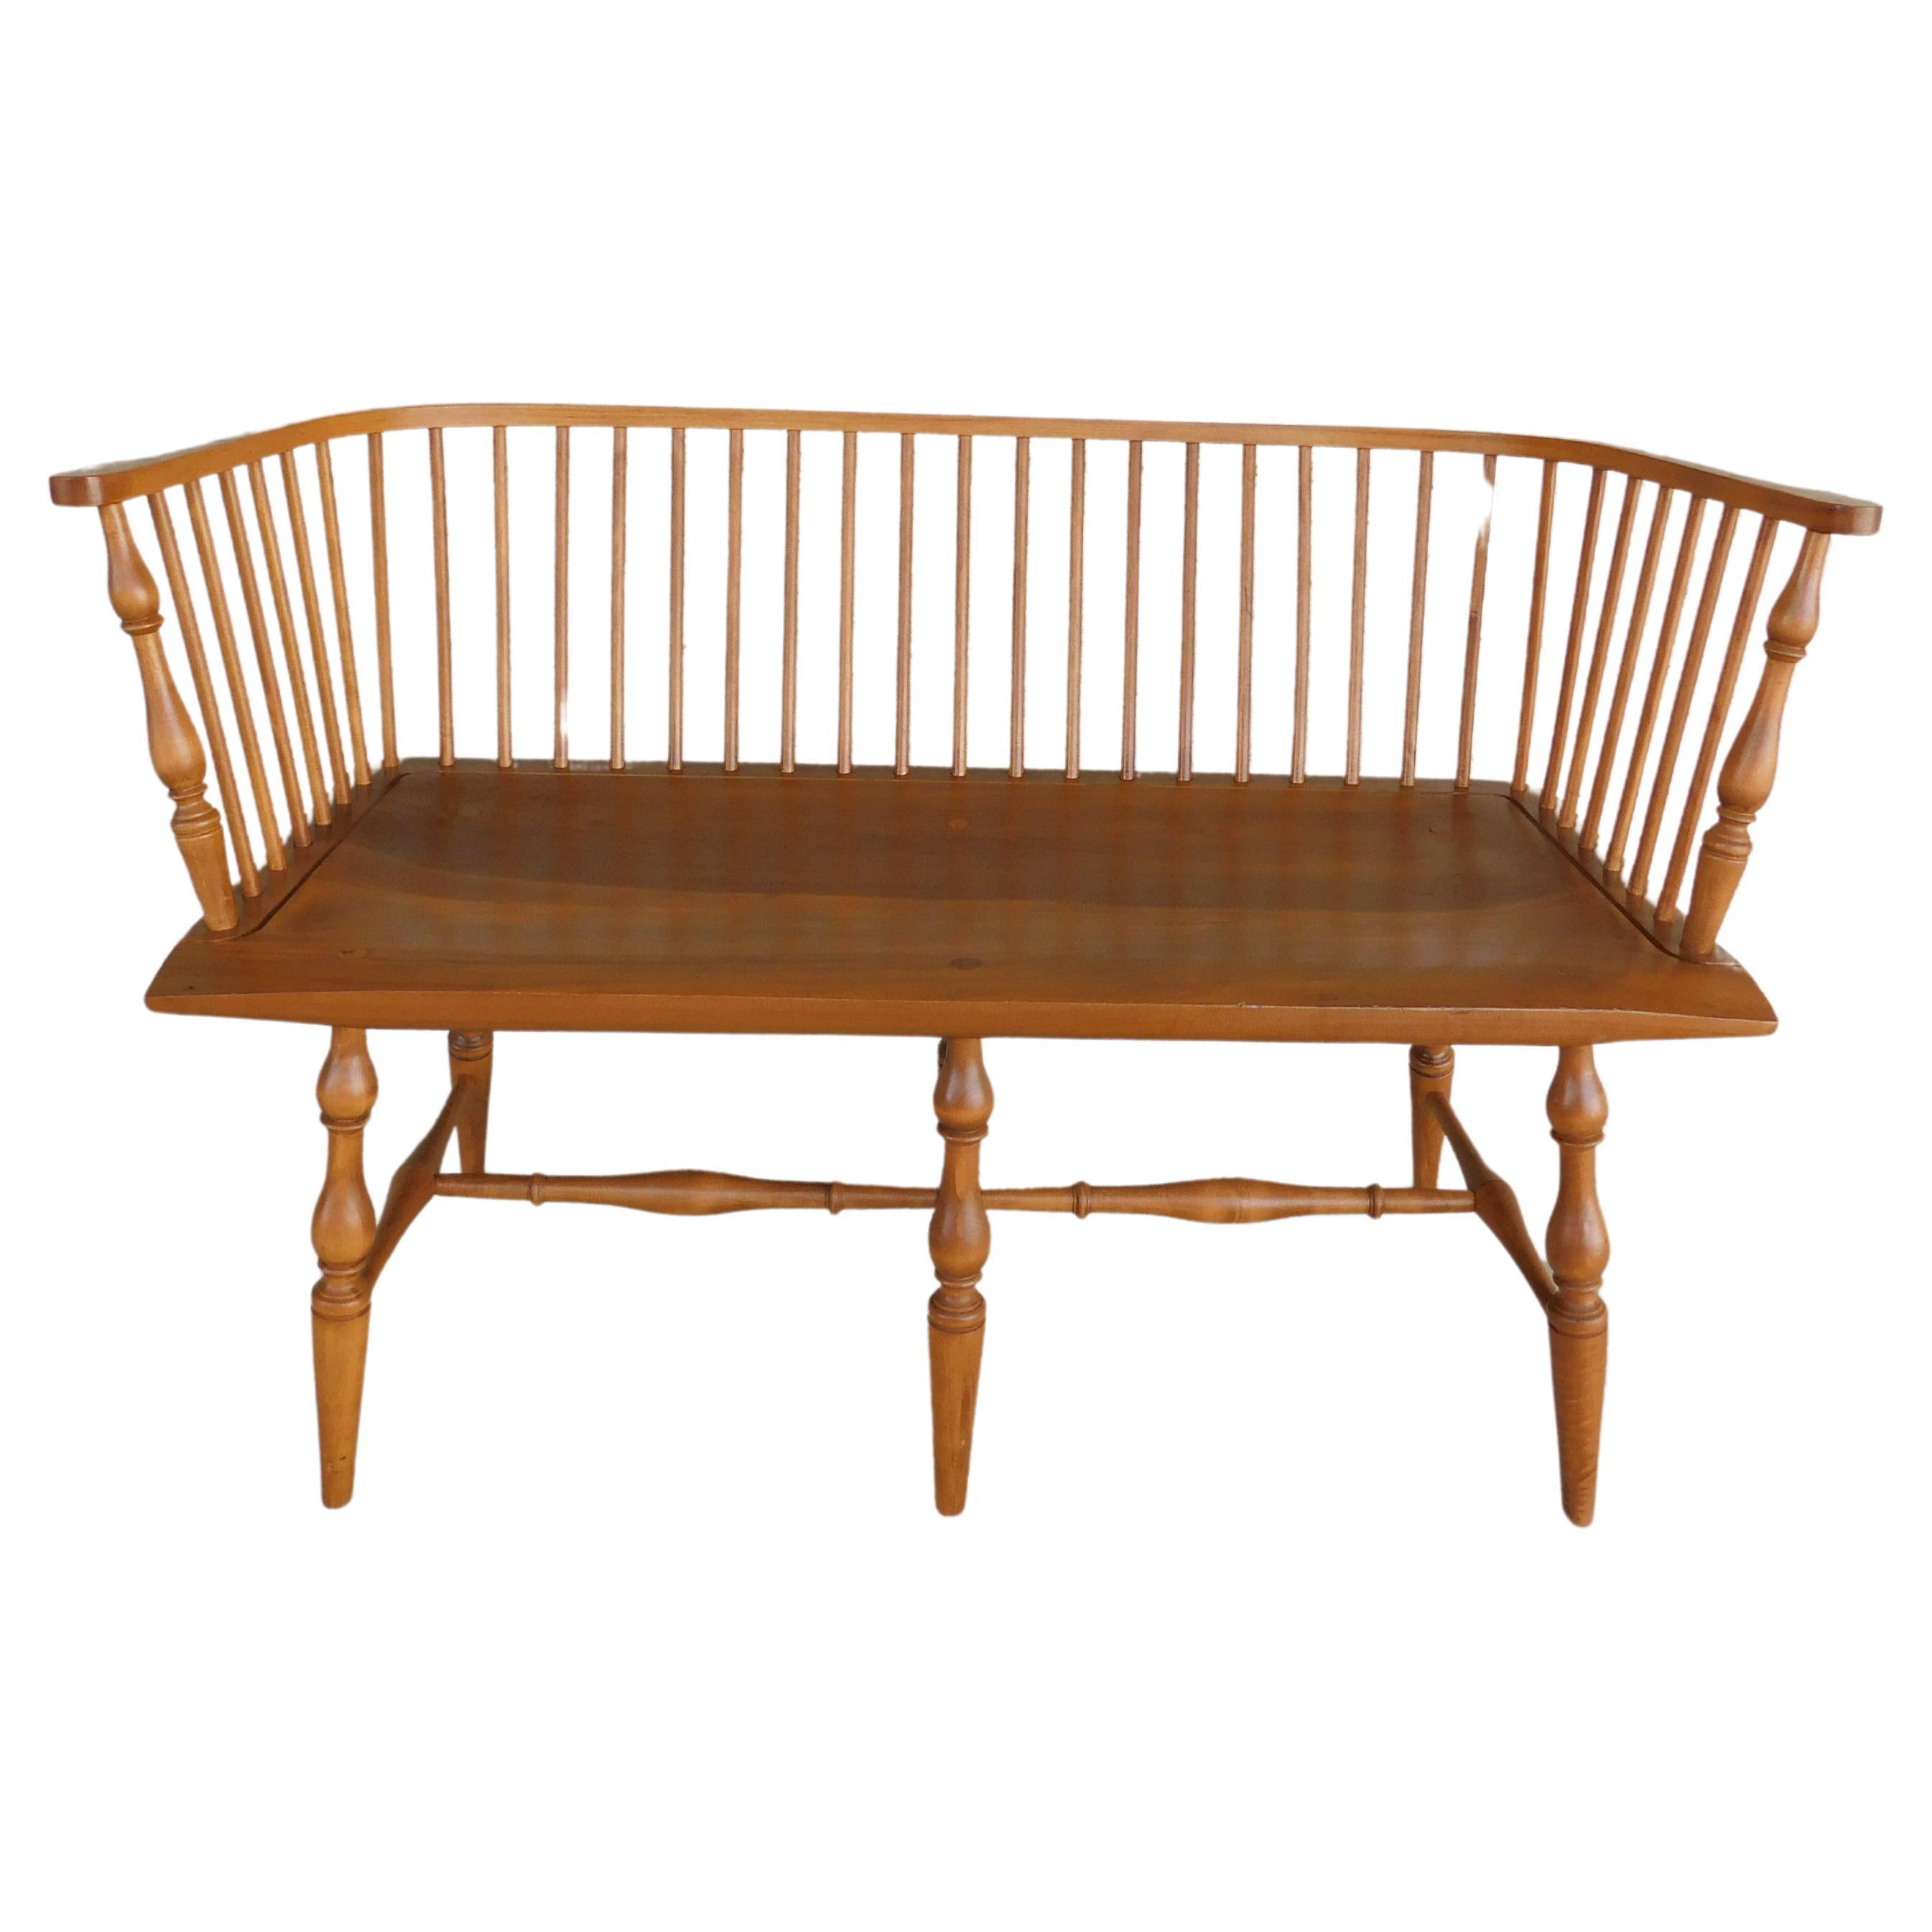 Custom Philadelphia Style Low-Back Windsor Settee

Features Hard Made Construction, Ash or Chestnut Back Rest, Cherry Wood Seat, with Maple Turned Legs. ( Not Signed ), Pegged through seat, and Back  

Very Good Condition, Normal Age Wear, Few Marks